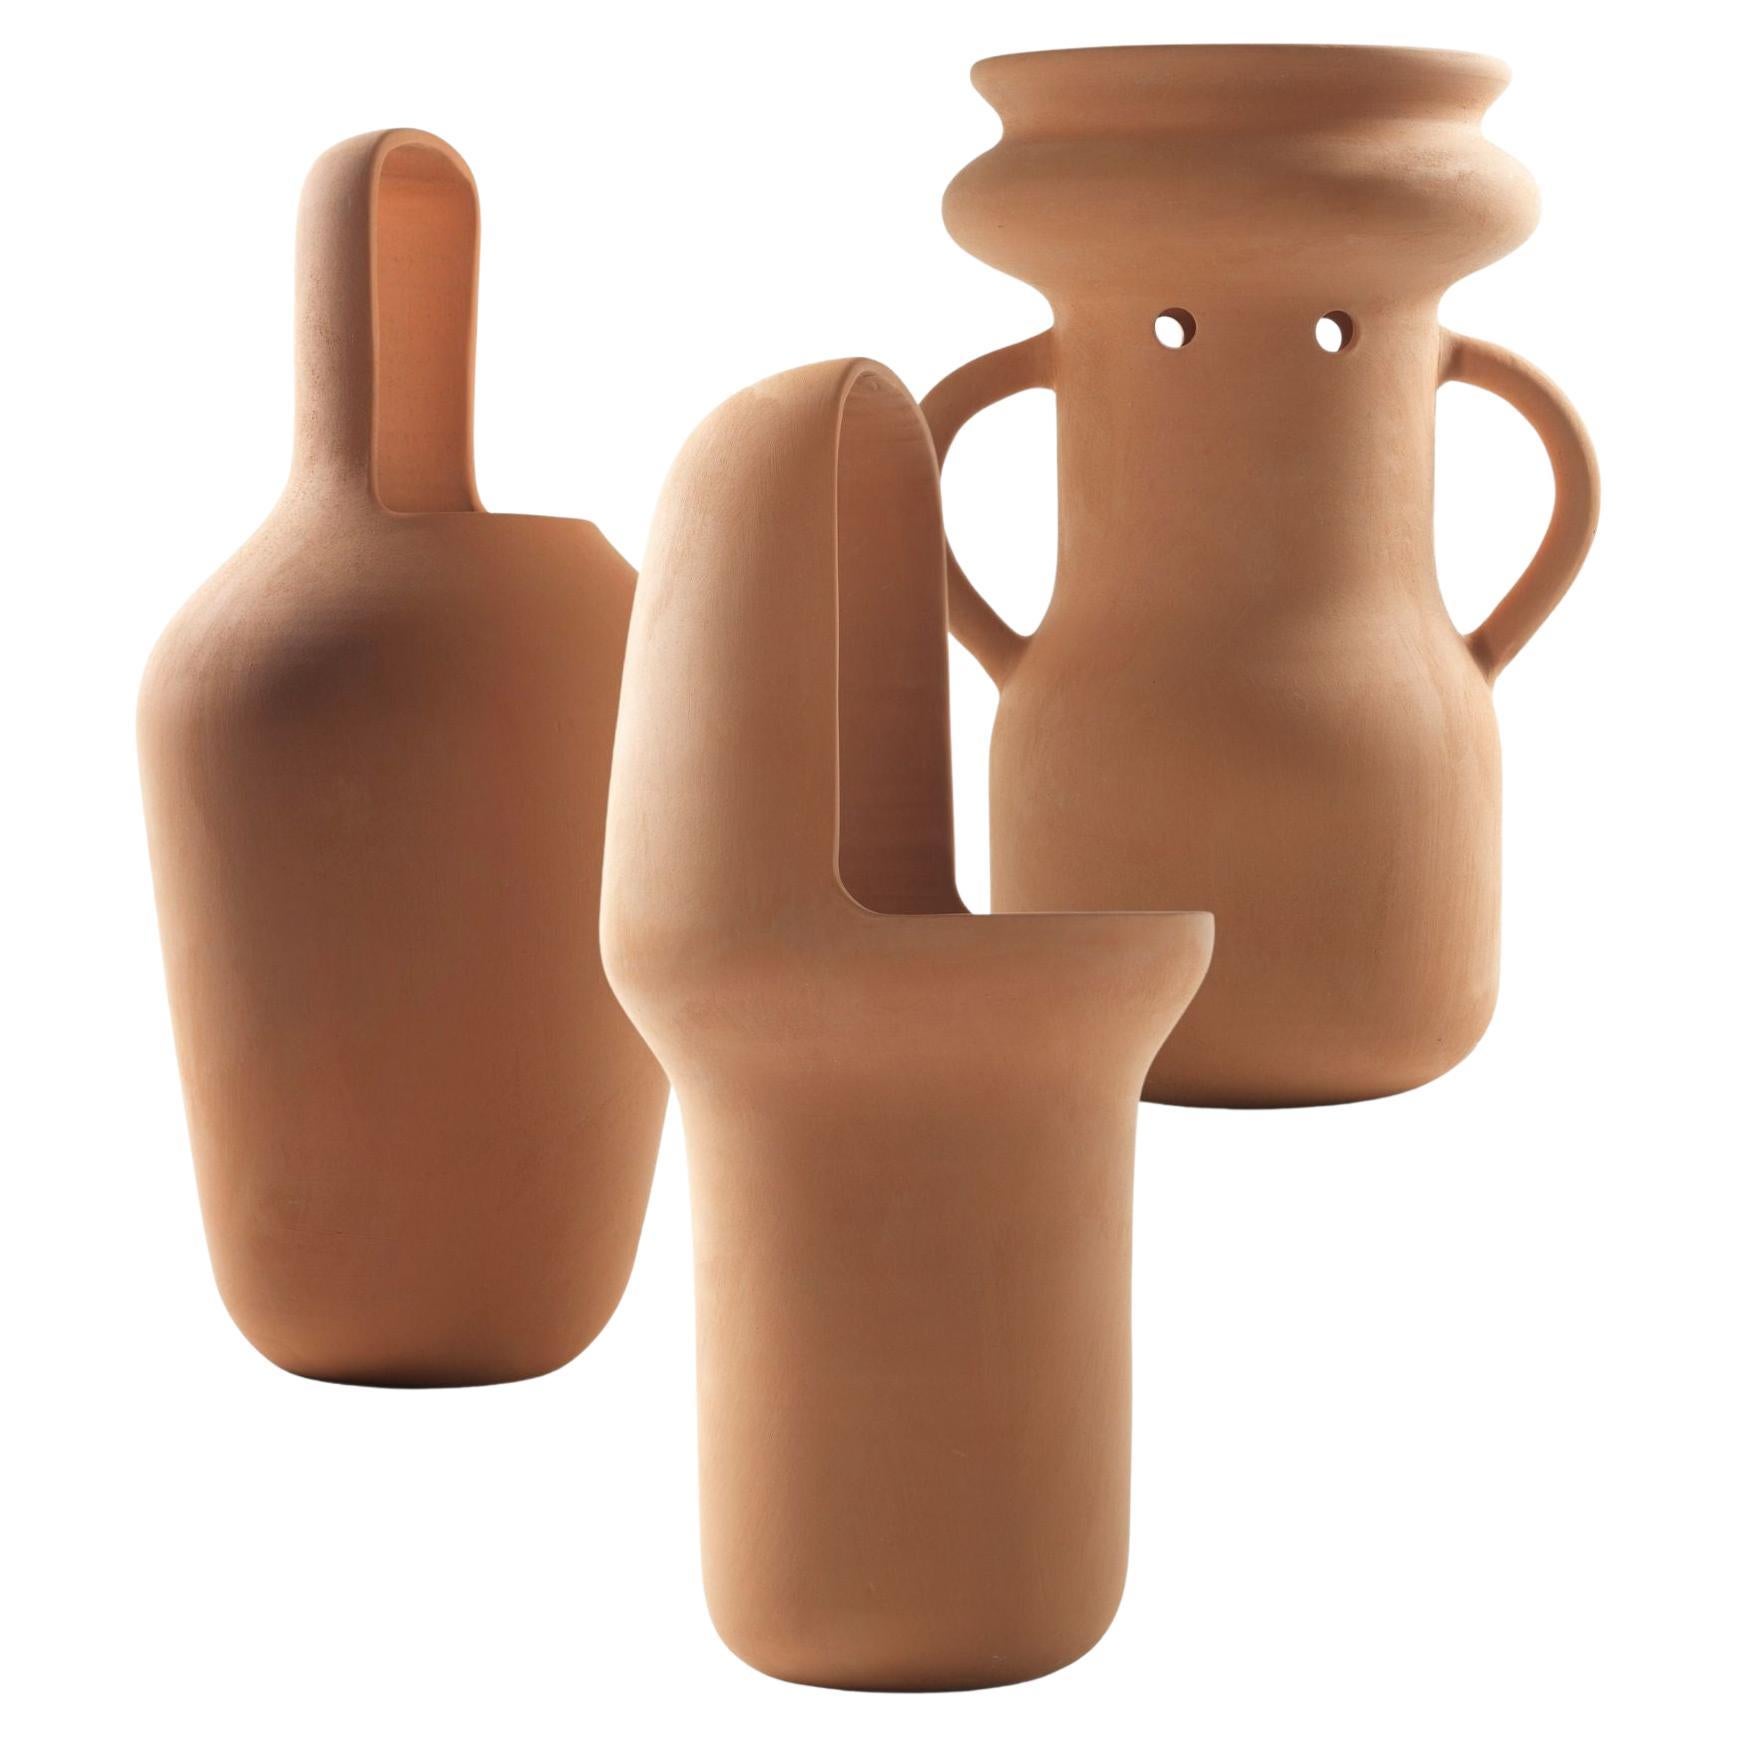 Set of 3 Outdoor Terracotta Vases from the series "Gardenias" by Jaime Hayon For Sale